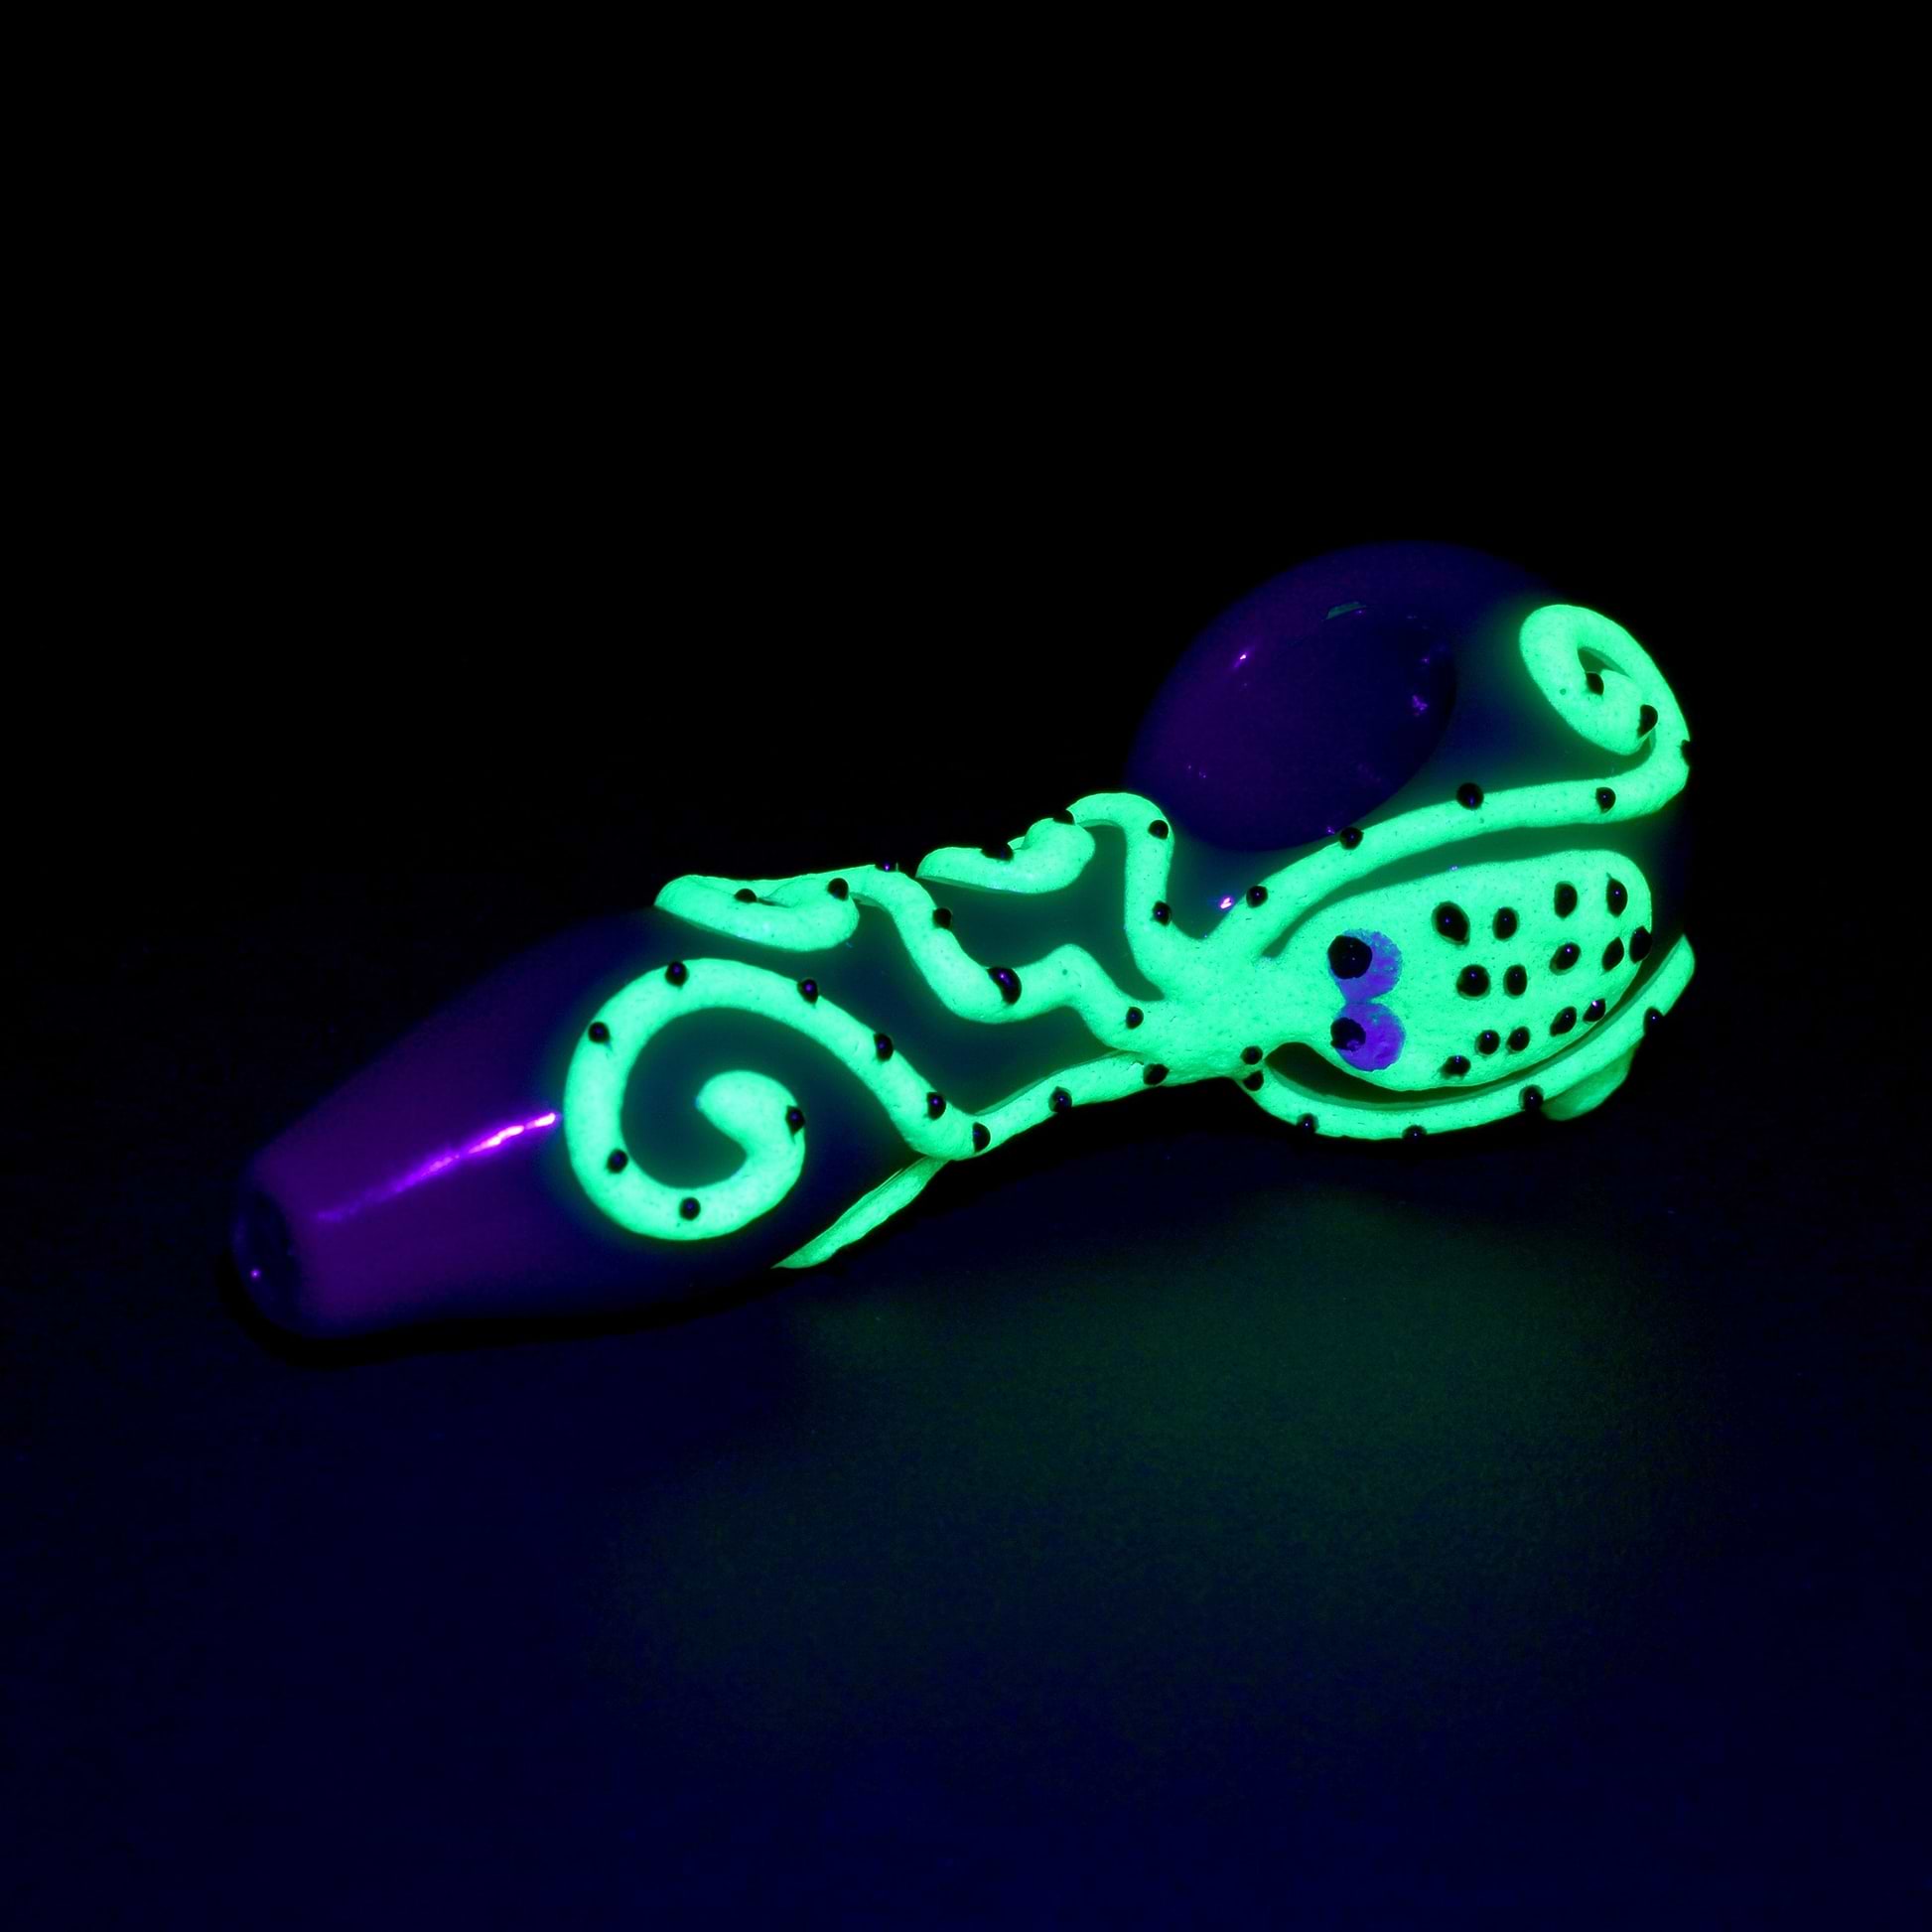 Full shot 4 inch green pipe bowl on the right glow in the dark dotted green octopus big eyes design dark background